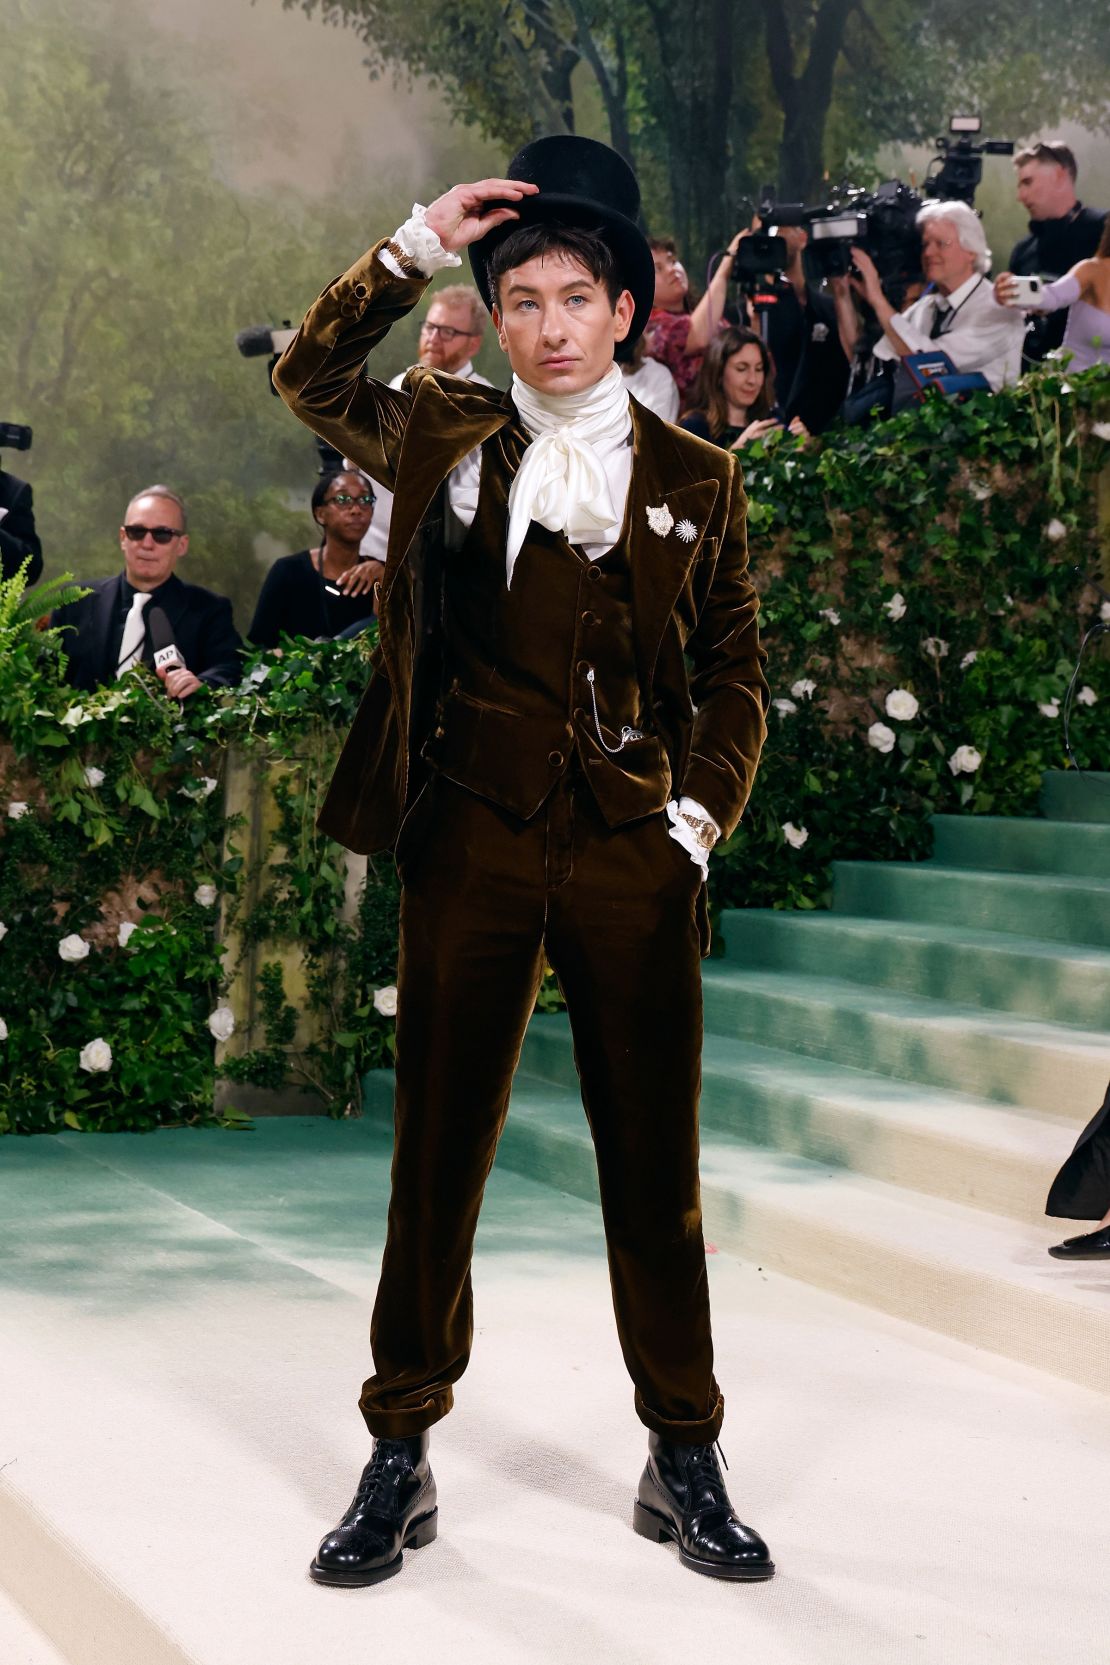 Barry Keoghan's Burberry suit came with a satin necktie, top hat and three watches.